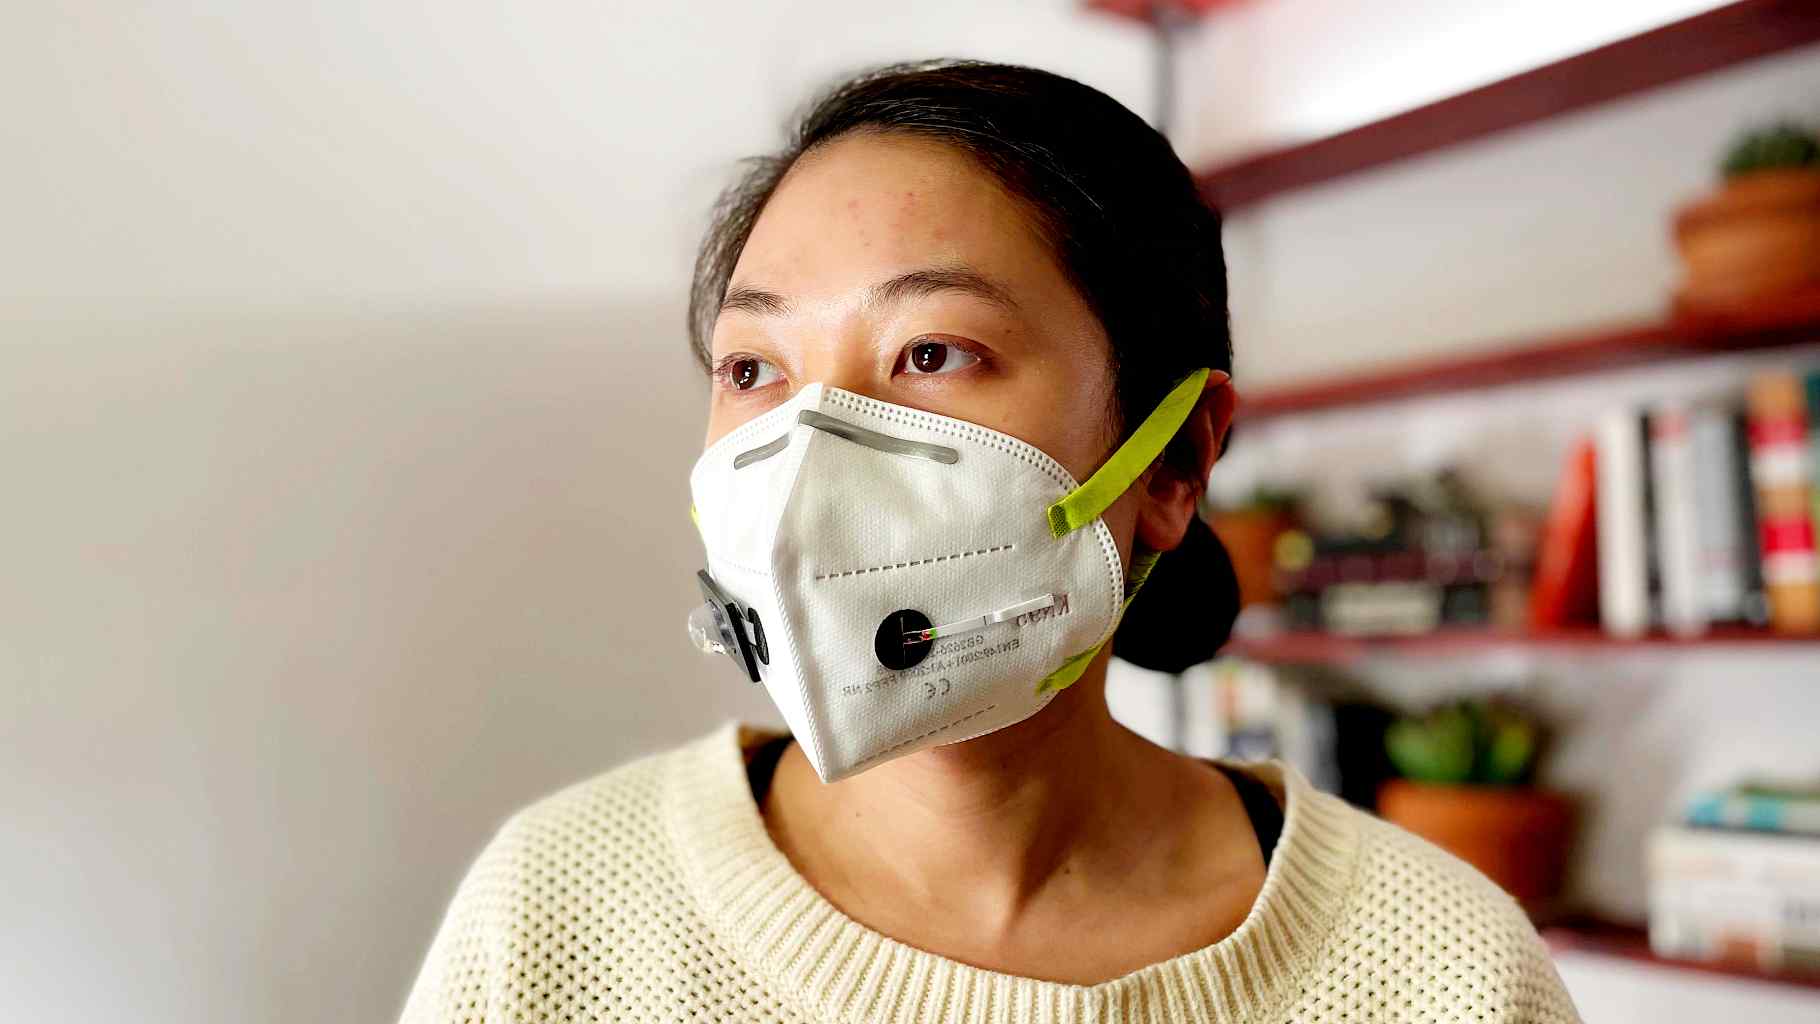 MIT mask study: new face mask prototype can detect COVID-19